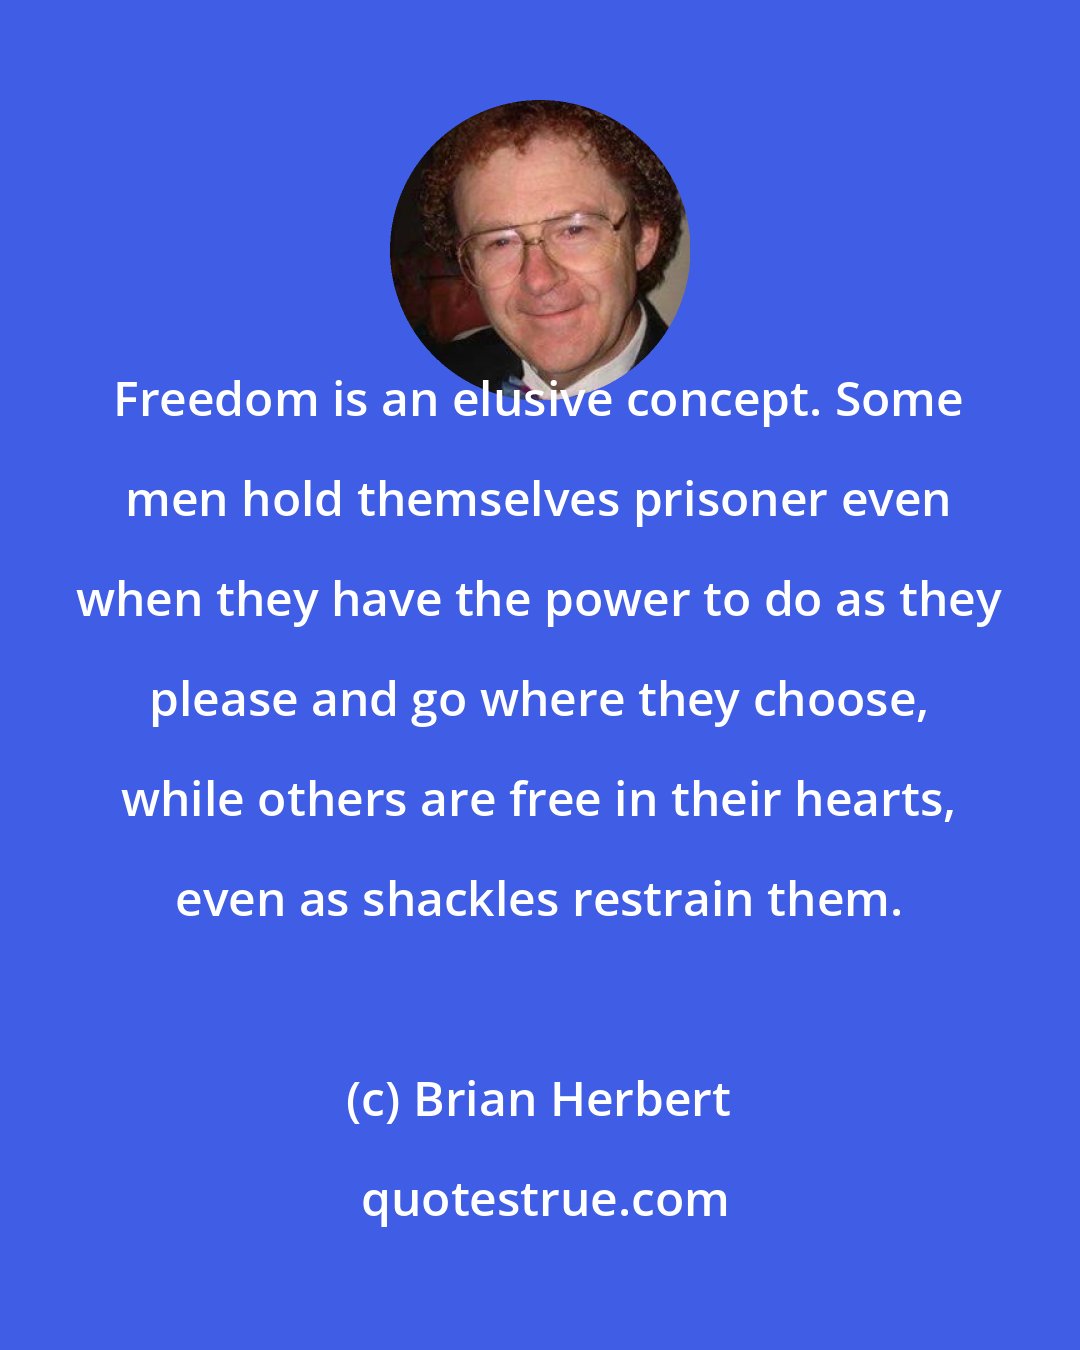 Brian Herbert: Freedom is an elusive concept. Some men hold themselves prisoner even when they have the power to do as they please and go where they choose, while others are free in their hearts, even as shackles restrain them.